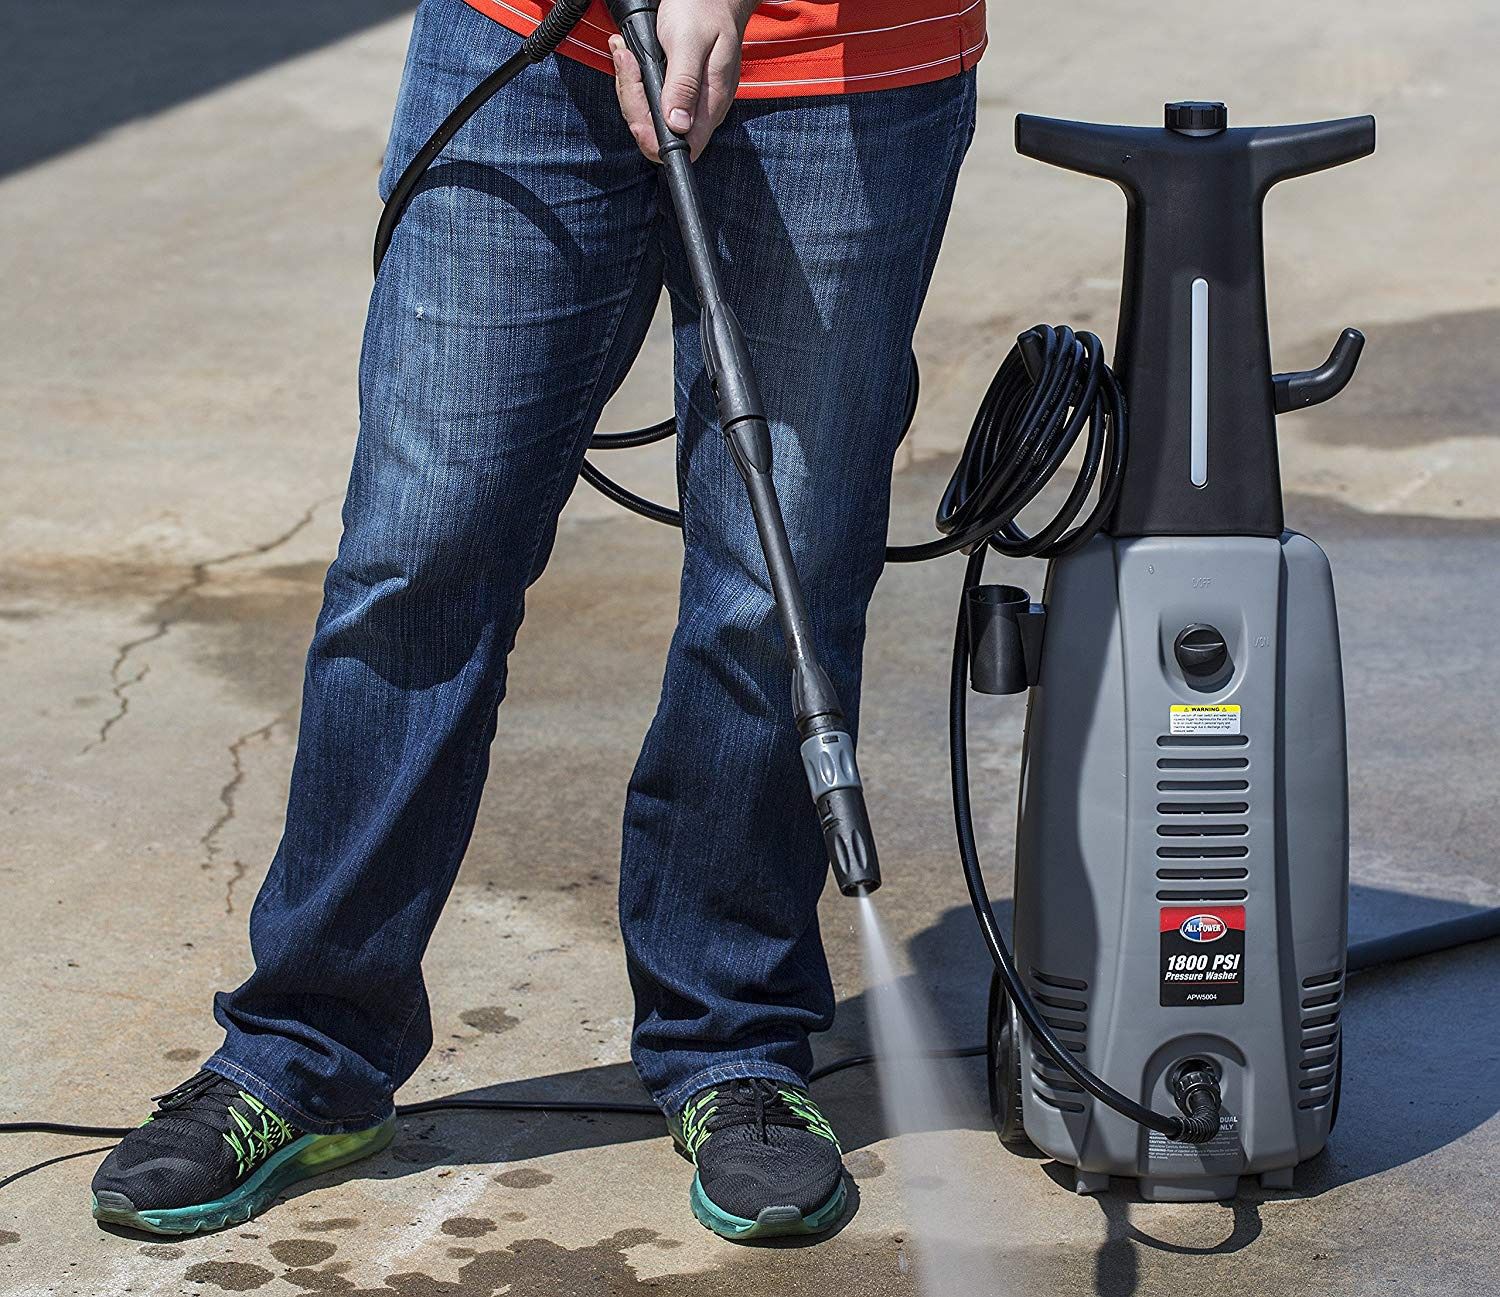 All Power 1800 PSI 1.6 GPM Electric Pressure Washer, Power Washer With Hose Reel for House, Walkway, Car and Outdoor Cleaning, APW5004